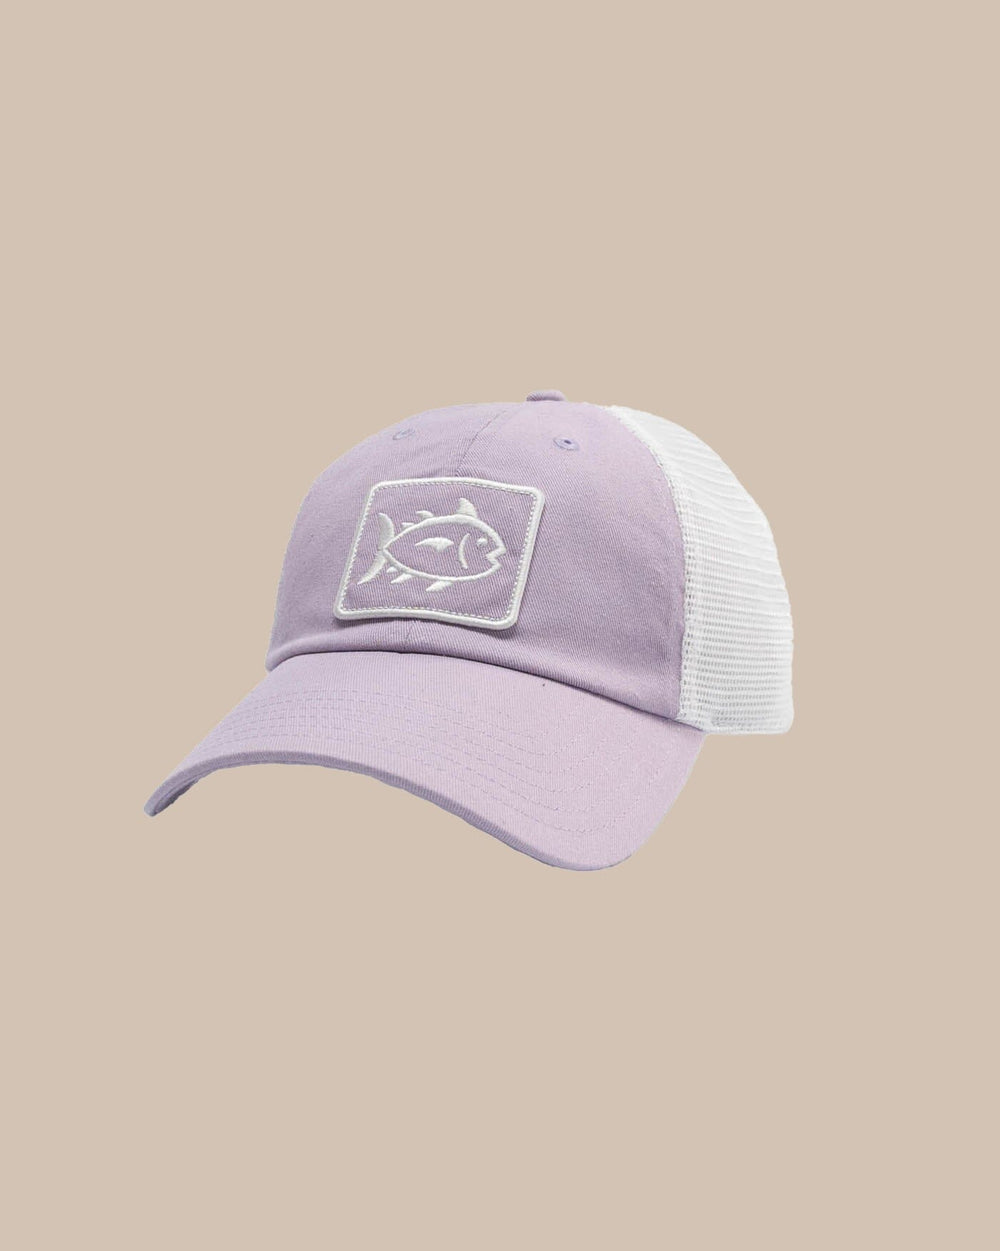 The front view of the Southern Tide Sun Farer Skipjack Fly Patch Trucker Hat by Southern Tide - Orchid Petal